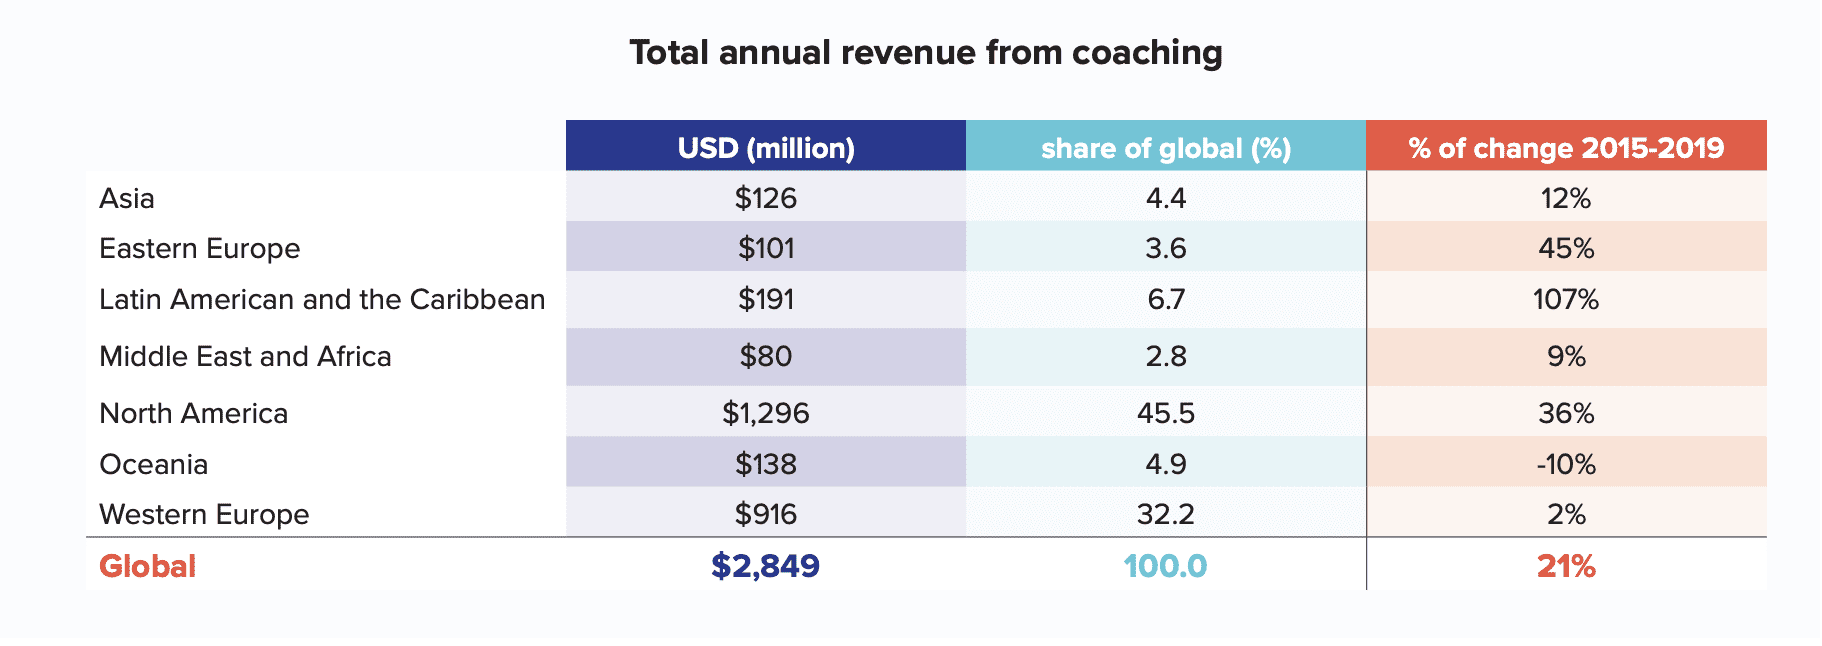 Total annual revenue from coaching